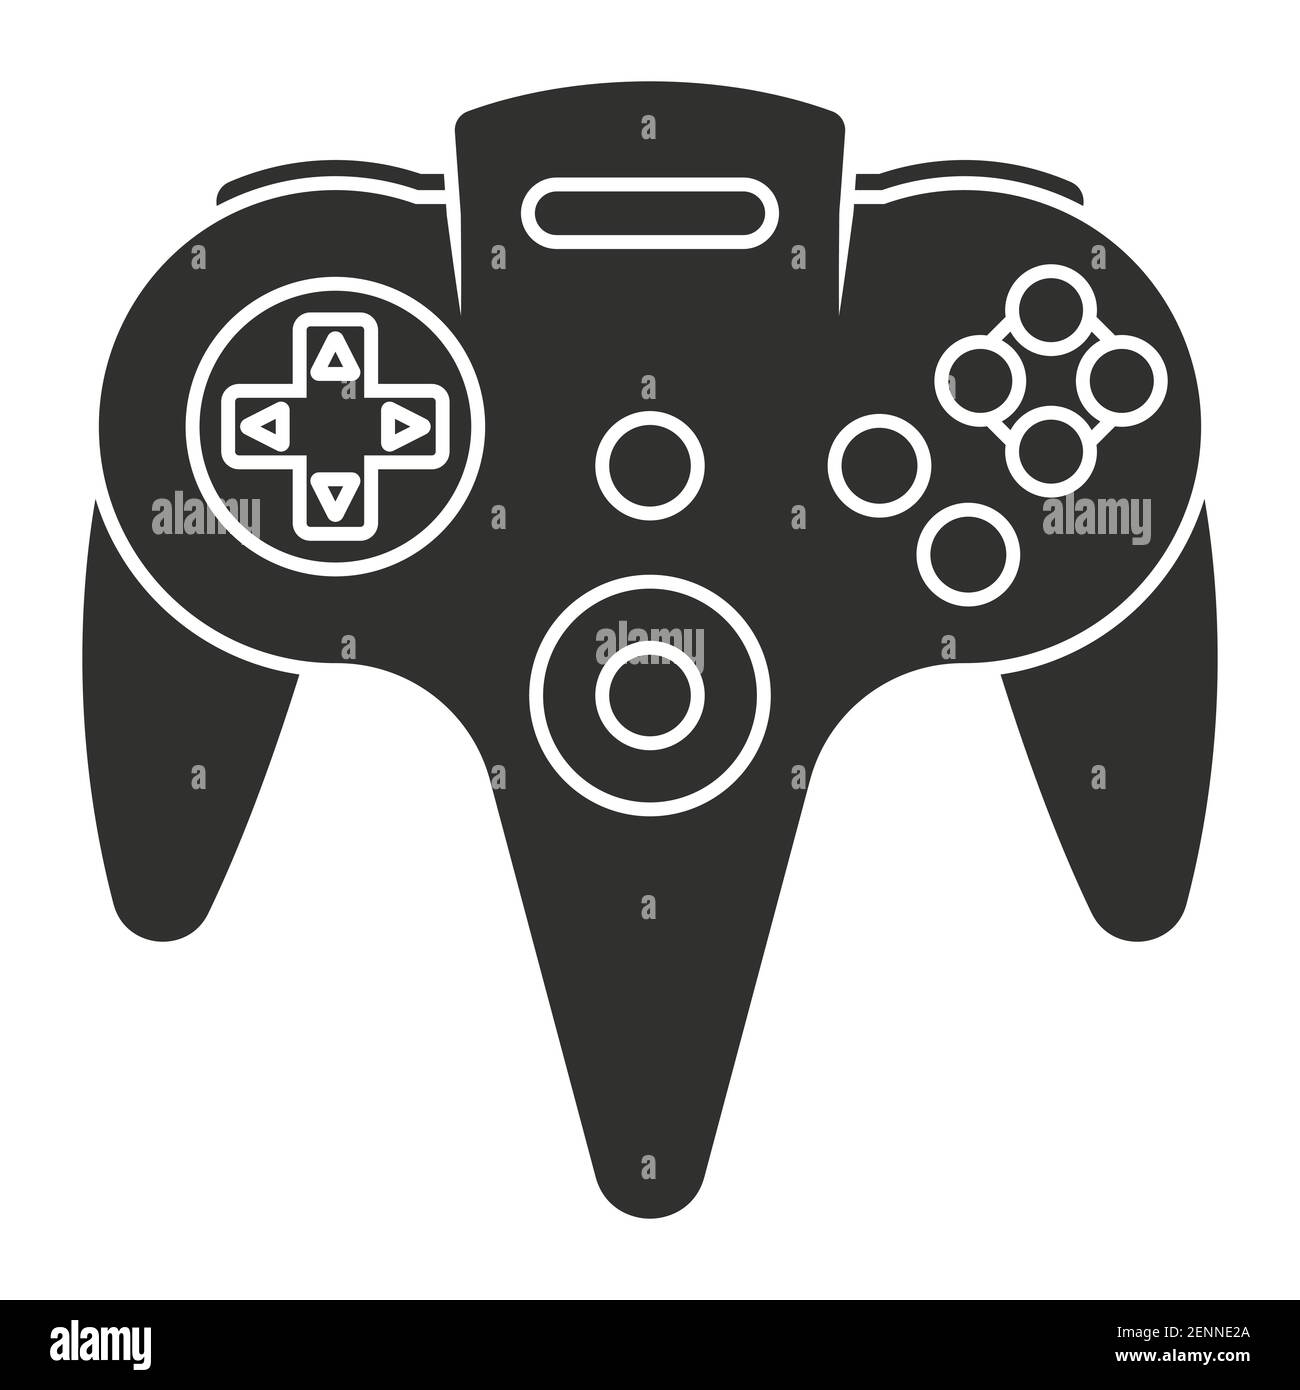 N64 or gamecube video game controller flat vector icon for apps or website Stock Vector